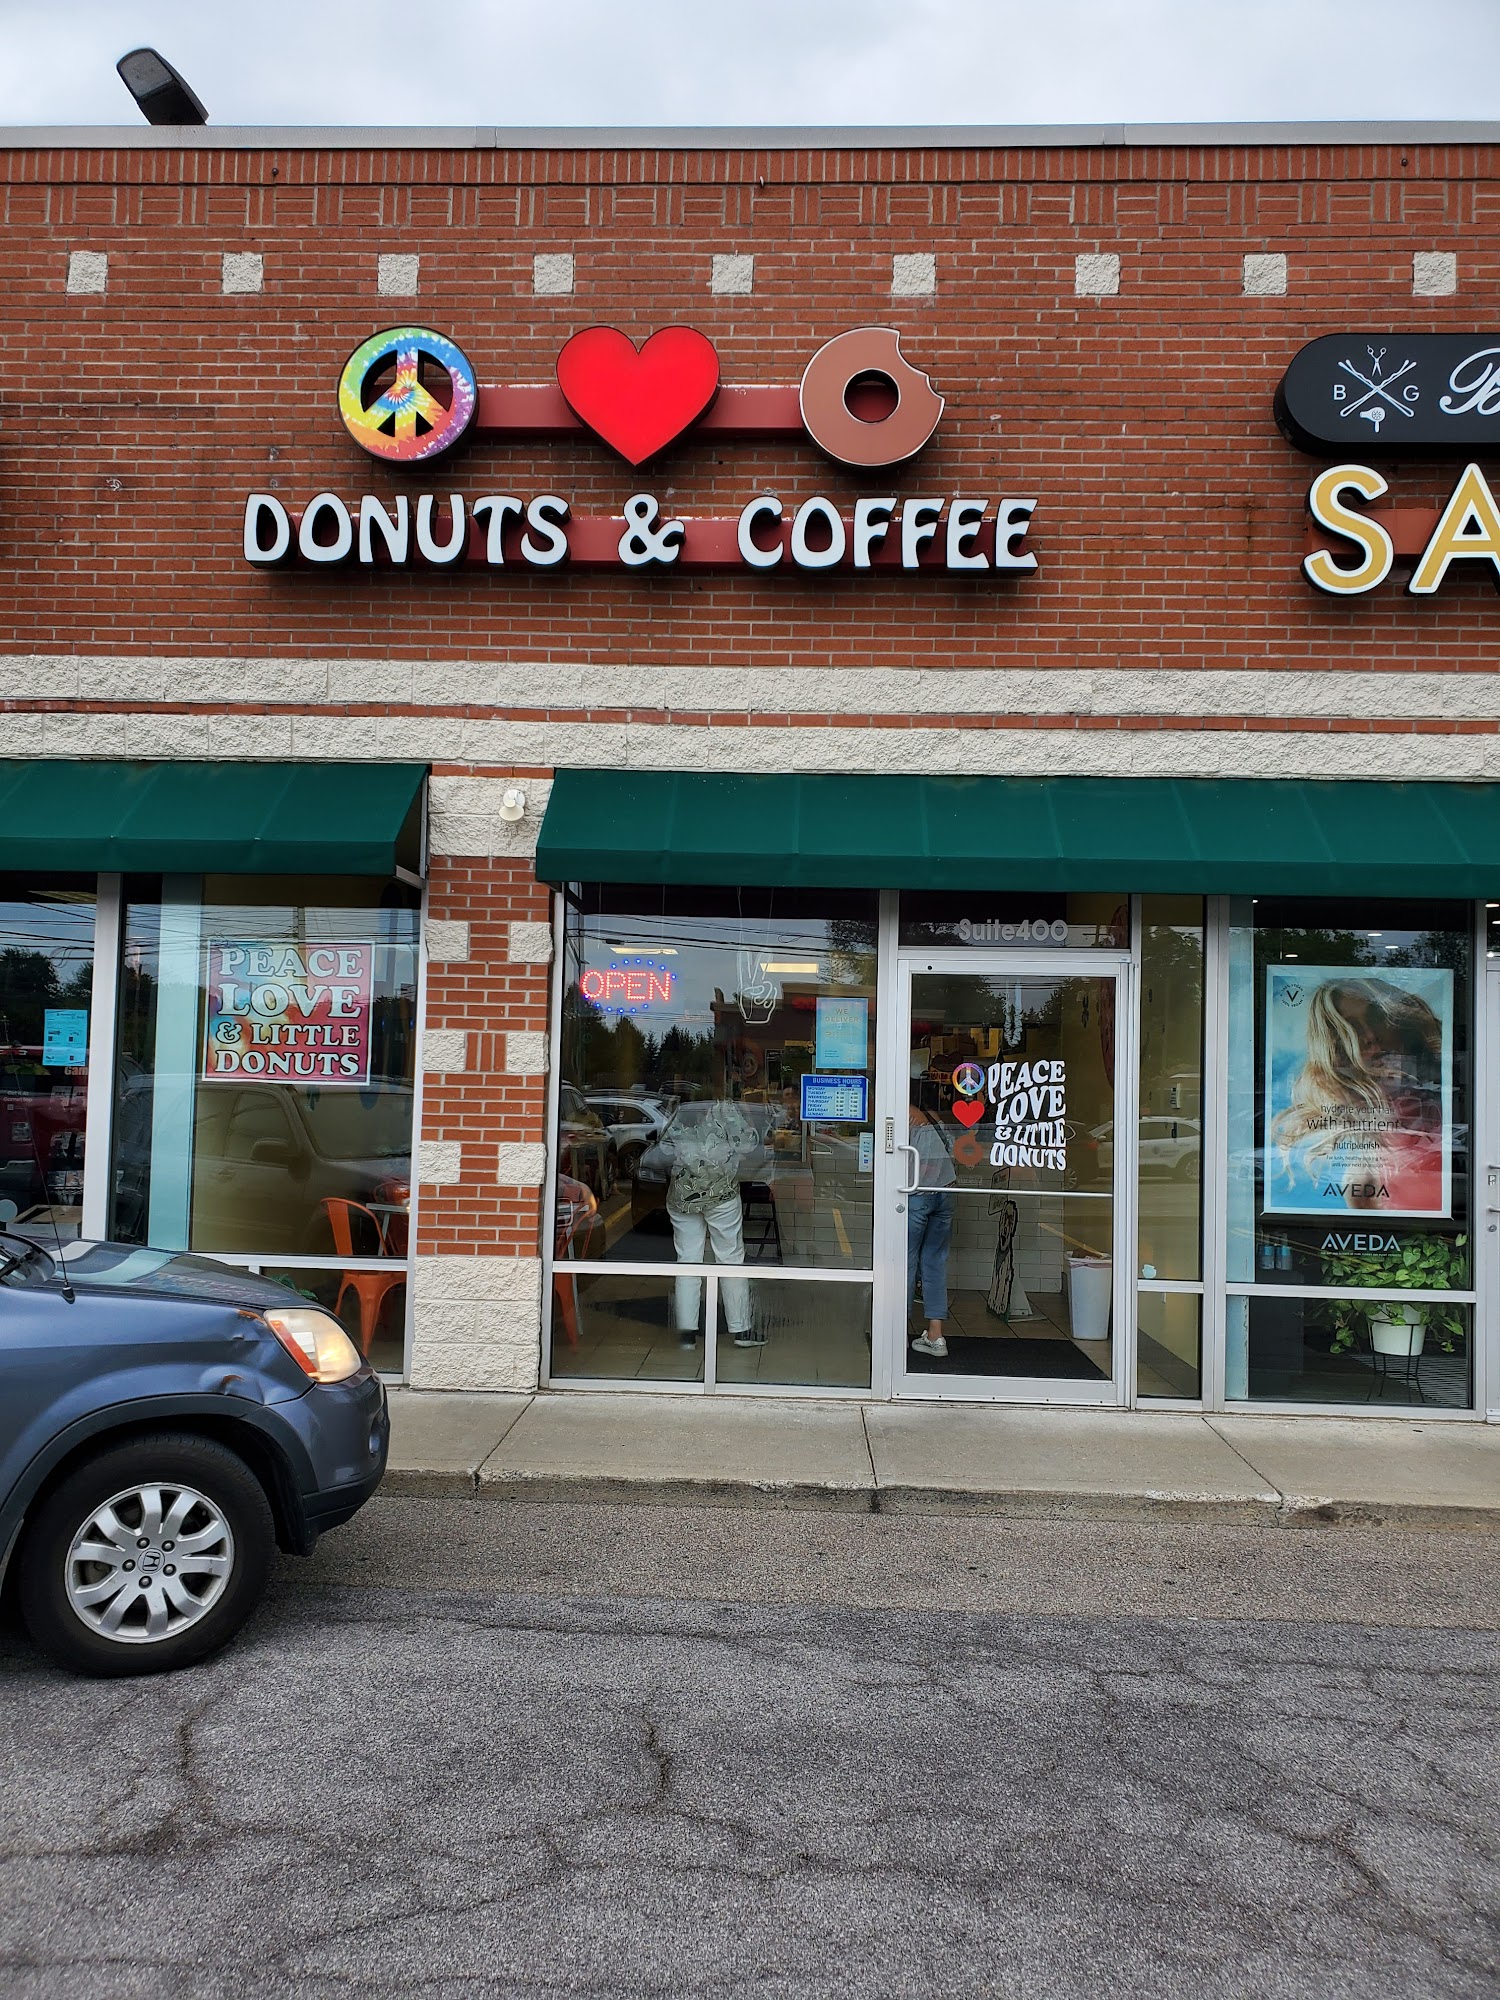 Peace, Love and Little Donuts of Buffalo